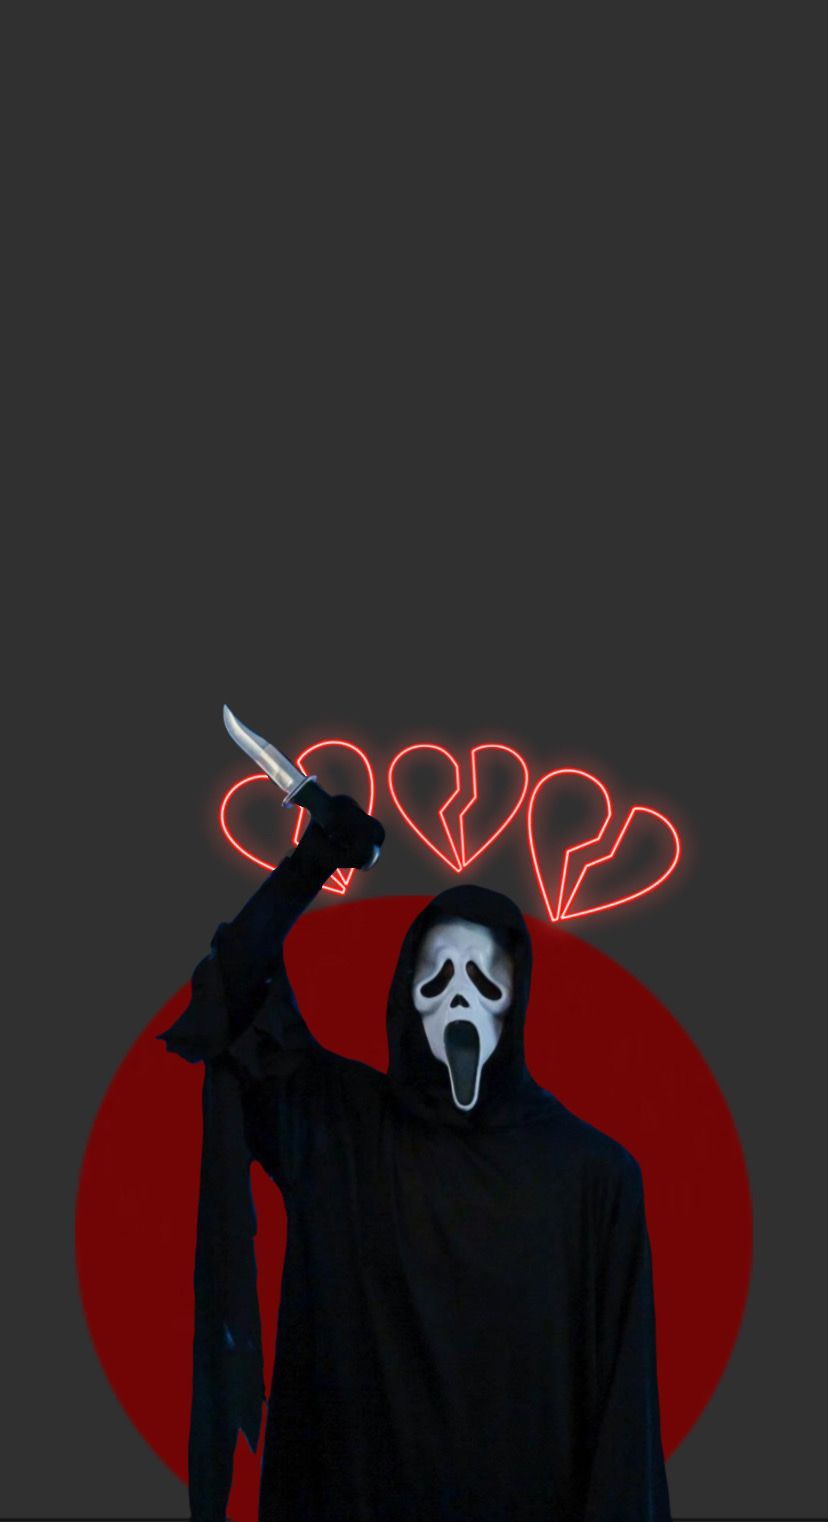 A person in black holding up an axe - Ghostface